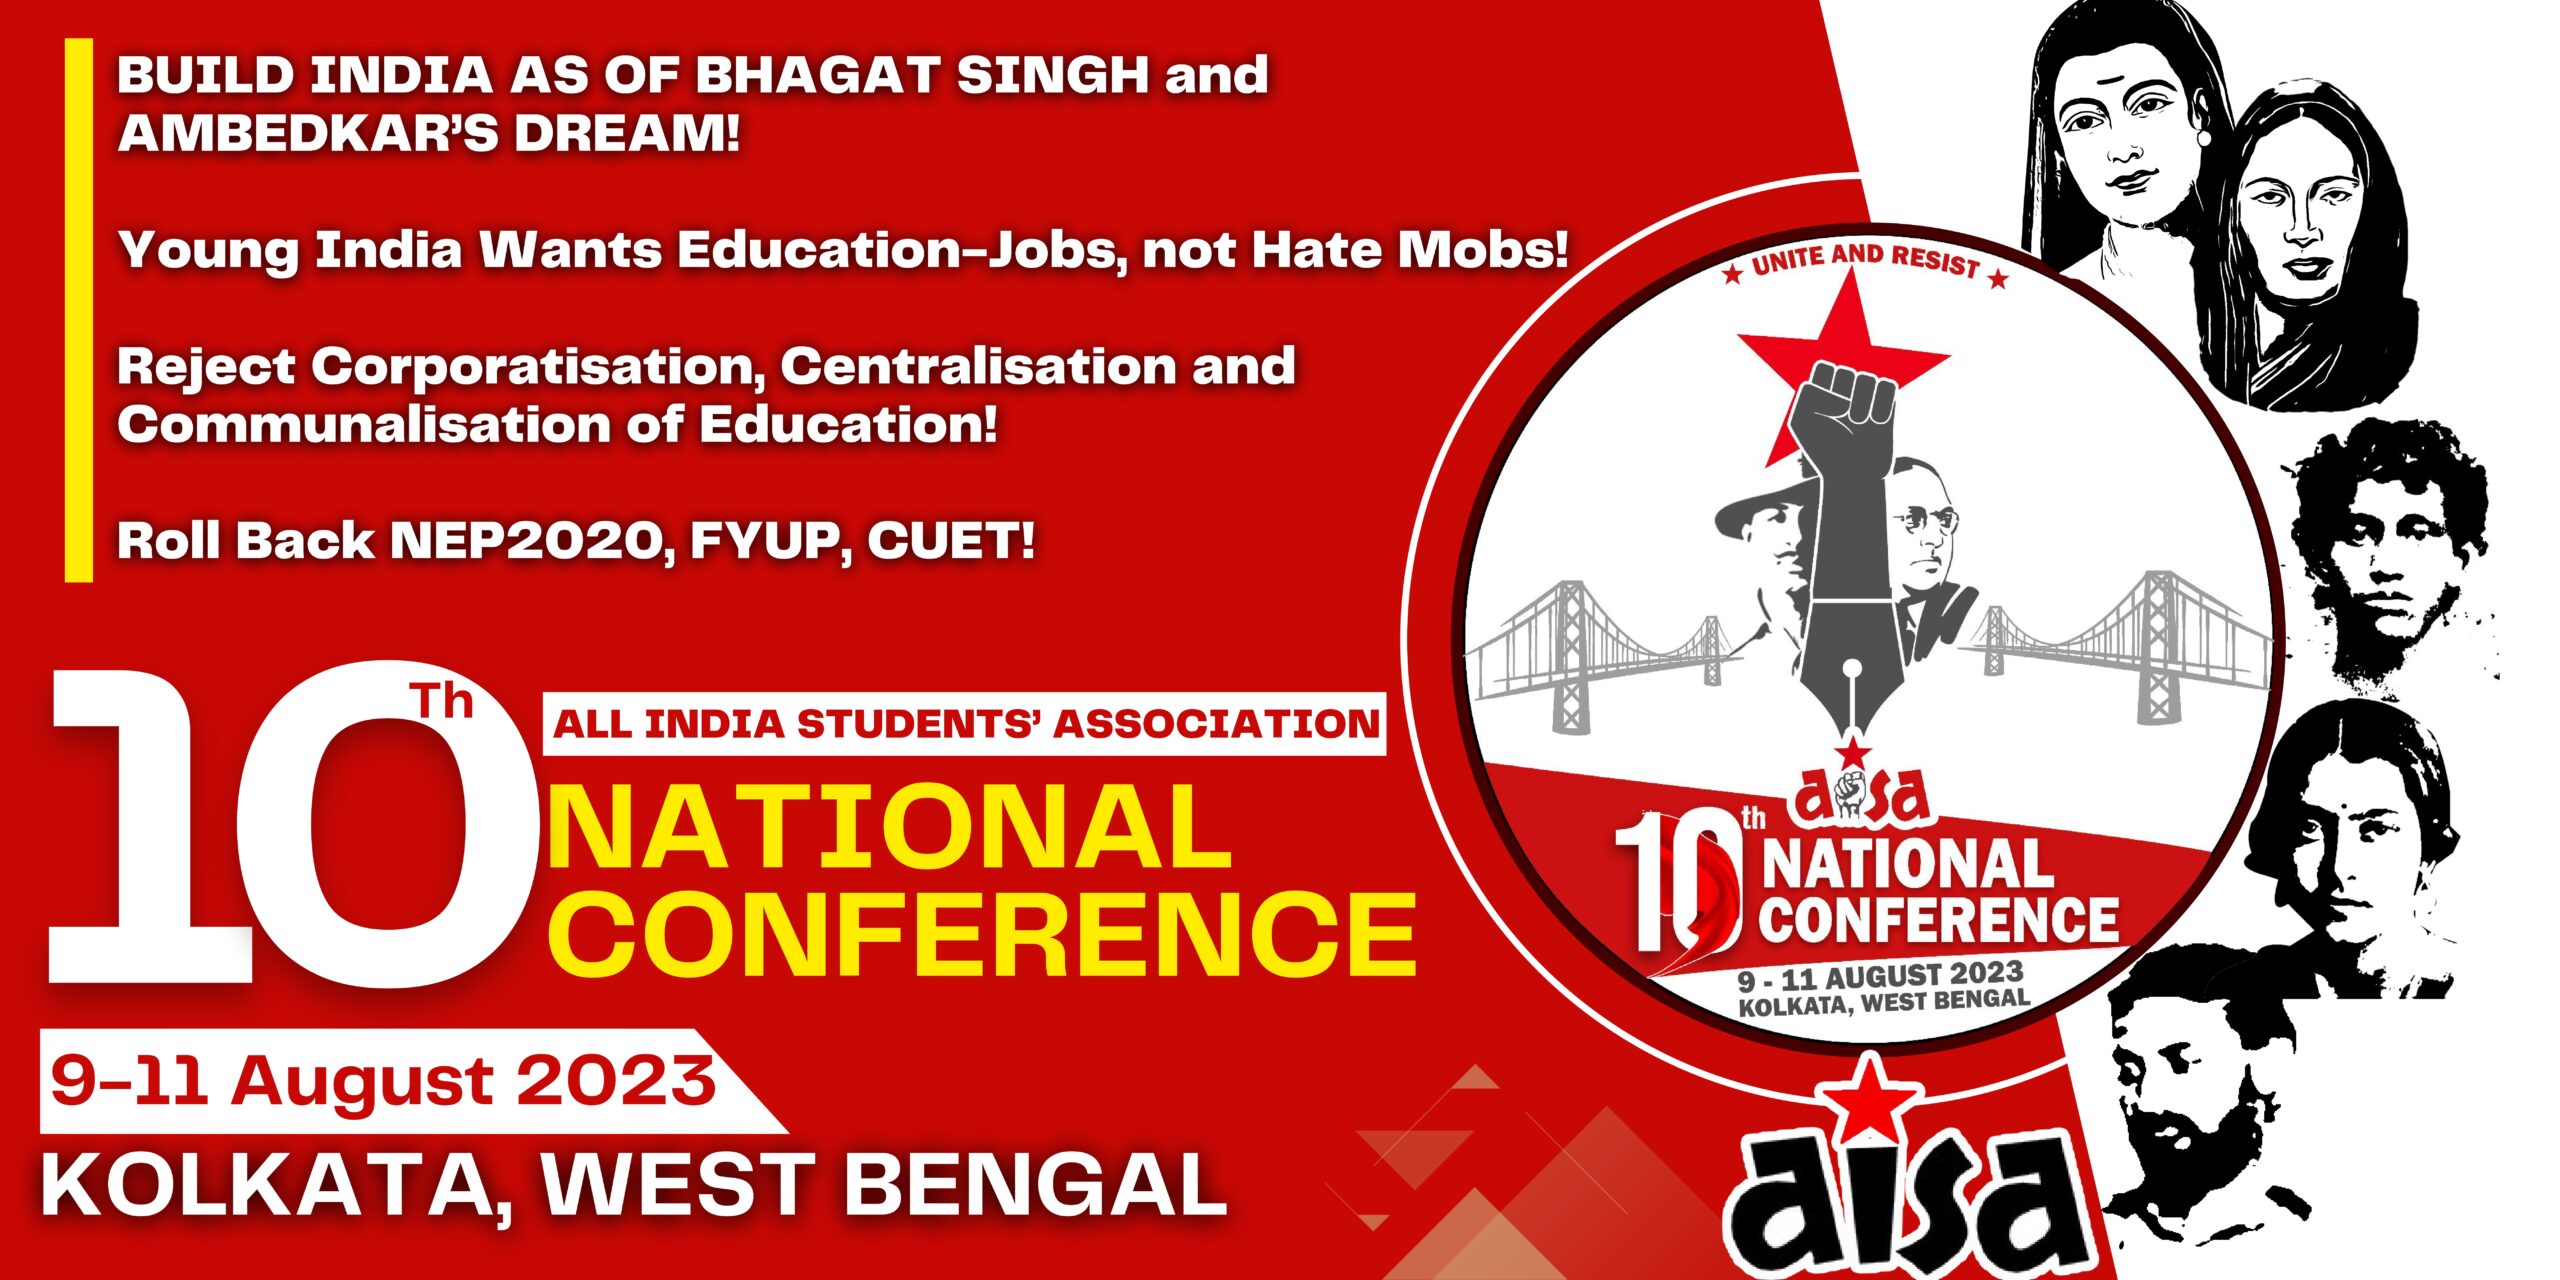 Onwards to the 10th National Conference